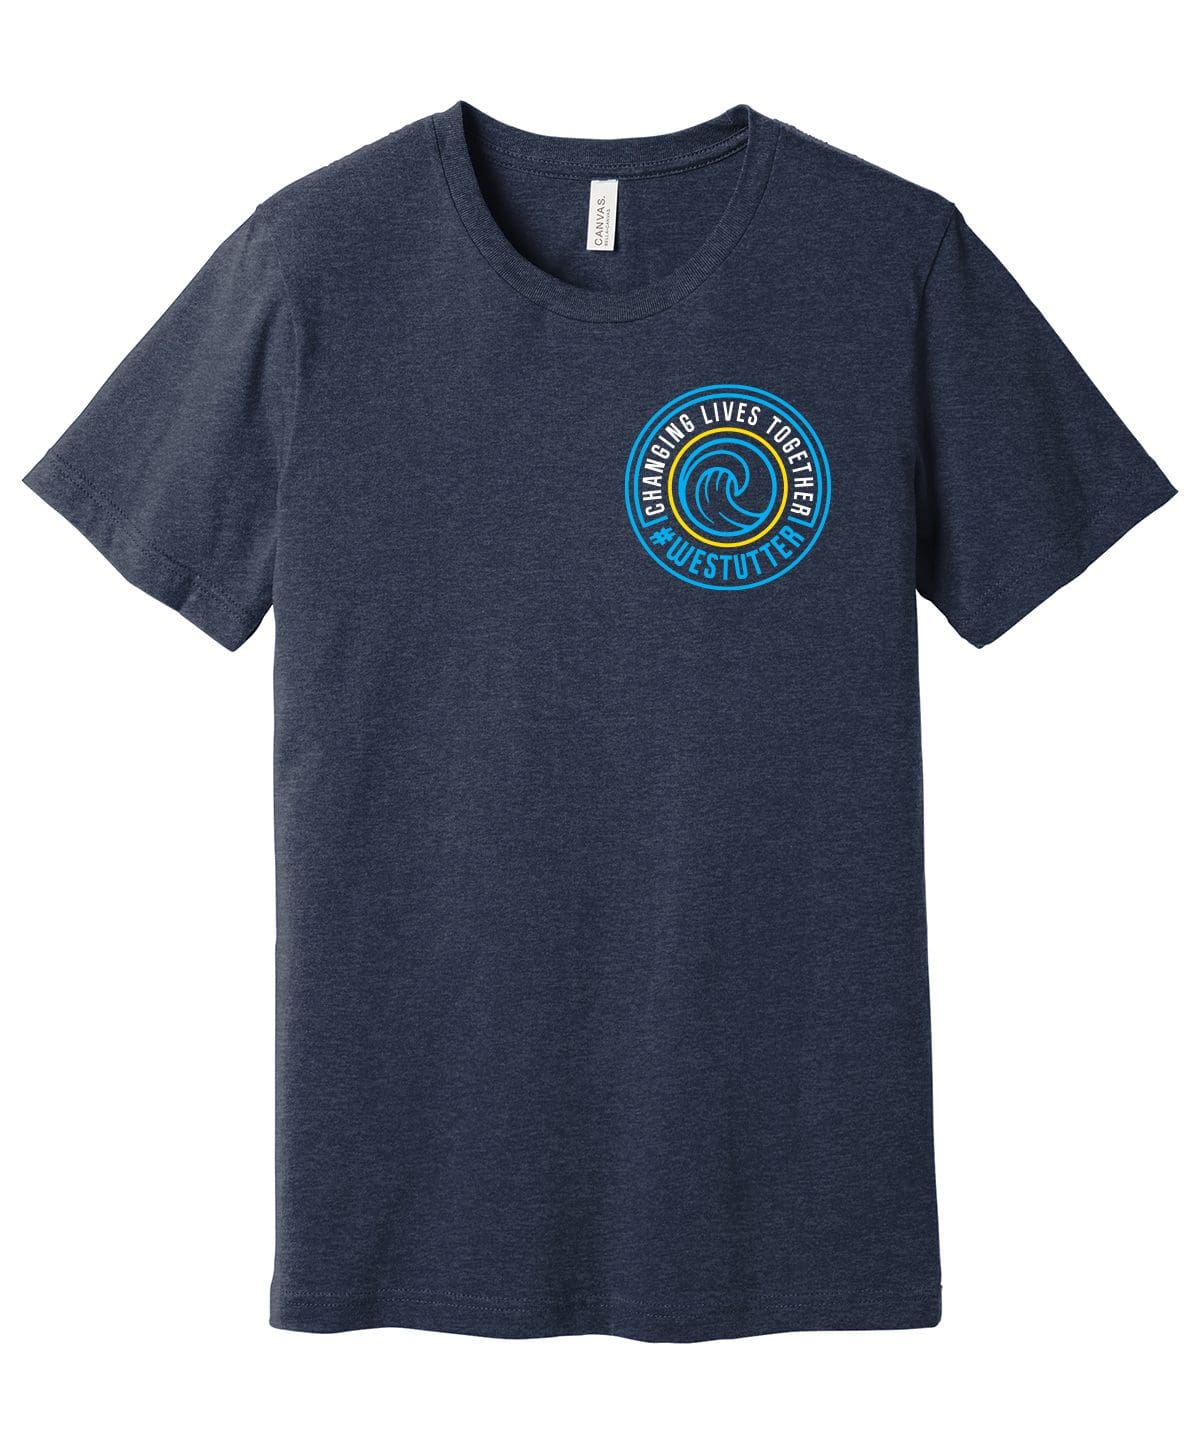 Newport Beach short sleeved t-shirt with a circular logo on the chest featuring a wave design and the text "marine lives matter, #saveturtles.